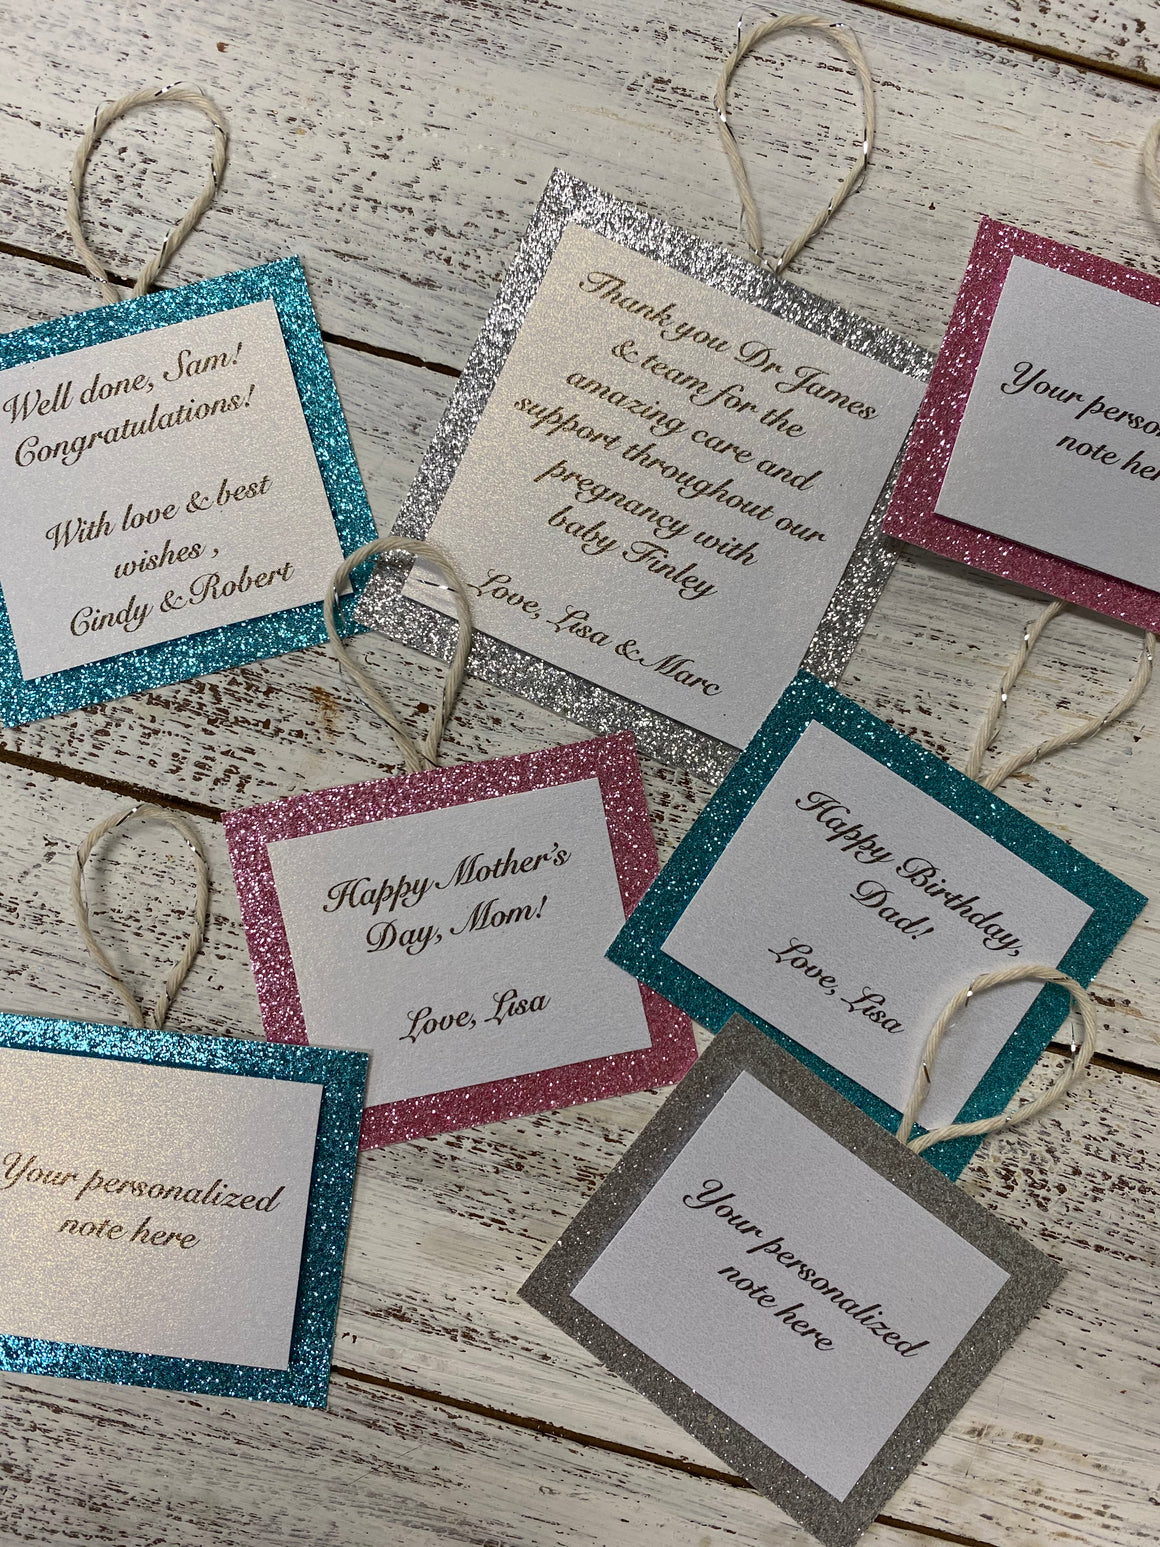 * Handmade Personalized Note Tag